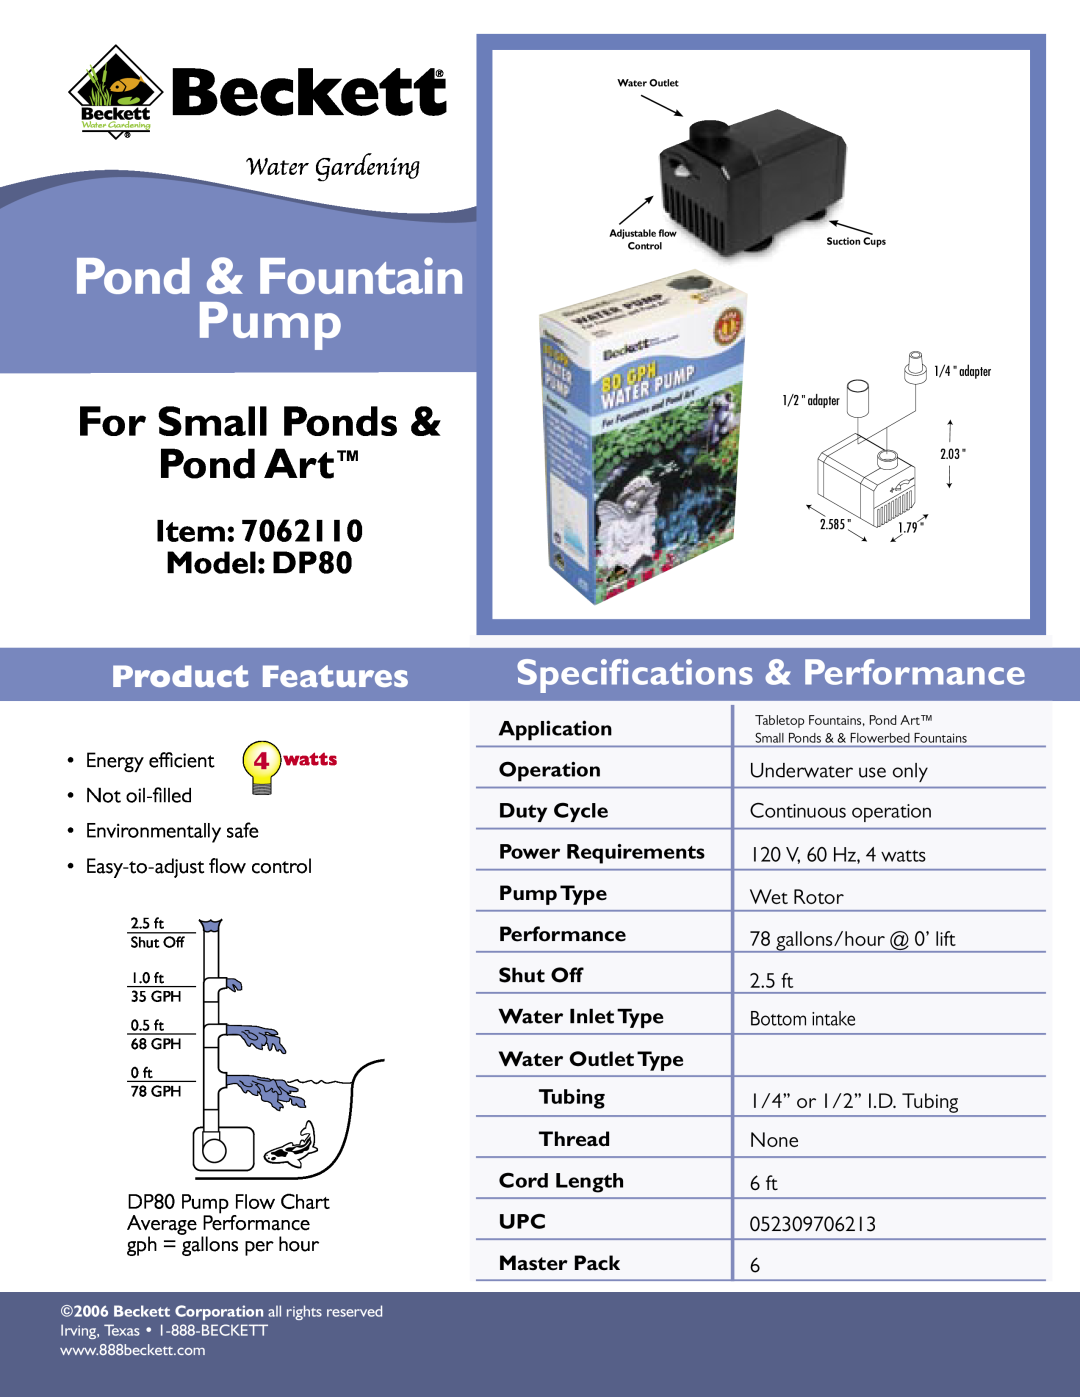 Beckett Water Gardening DP80 specifications Pump, Pond & Fountain, For Small Ponds & Pond Art, Speciﬁcations & Performance 